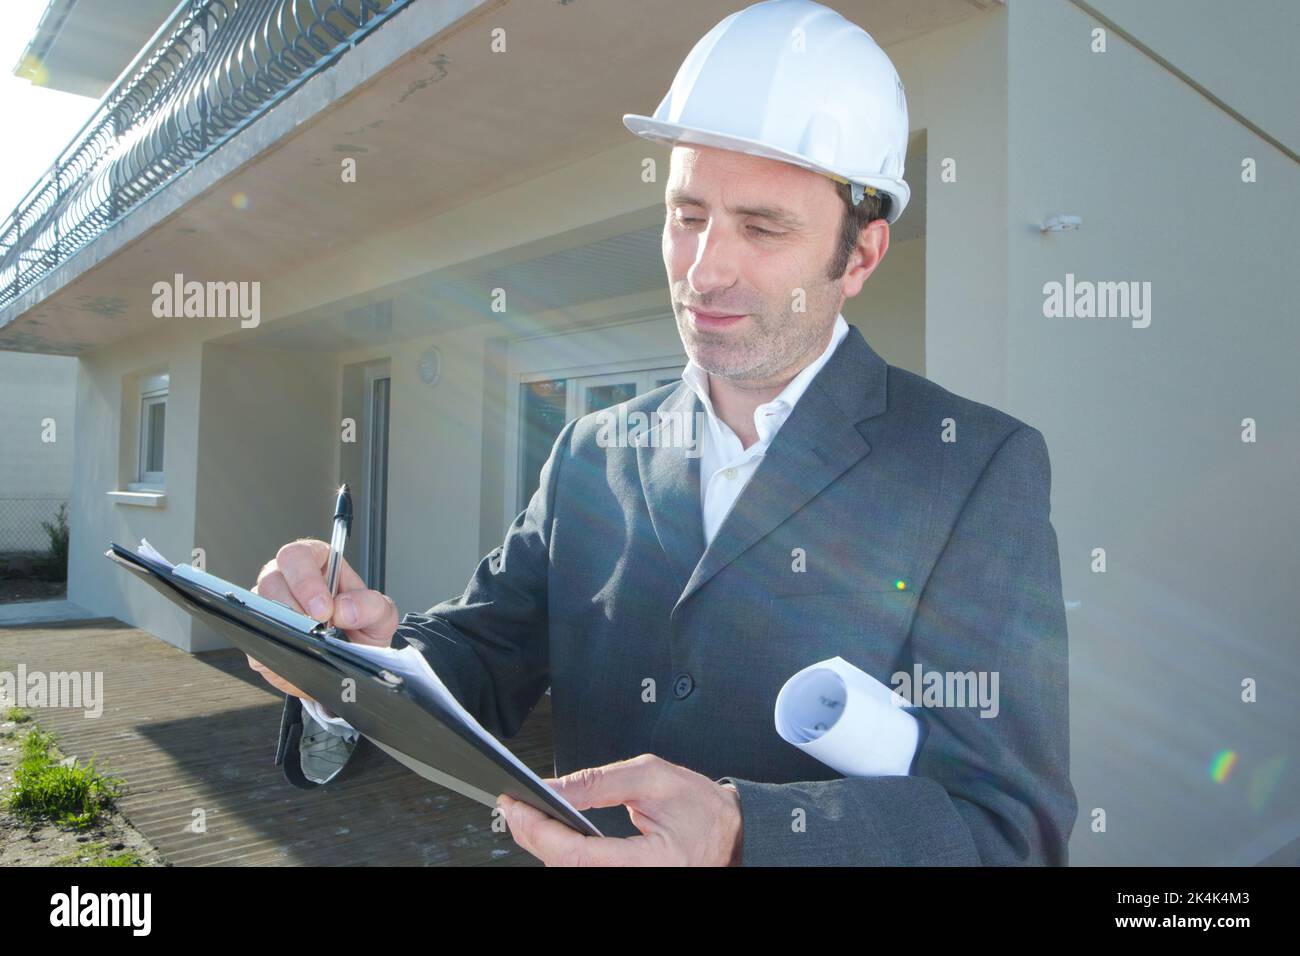 man architect in helmet working outdoors Stock Photo